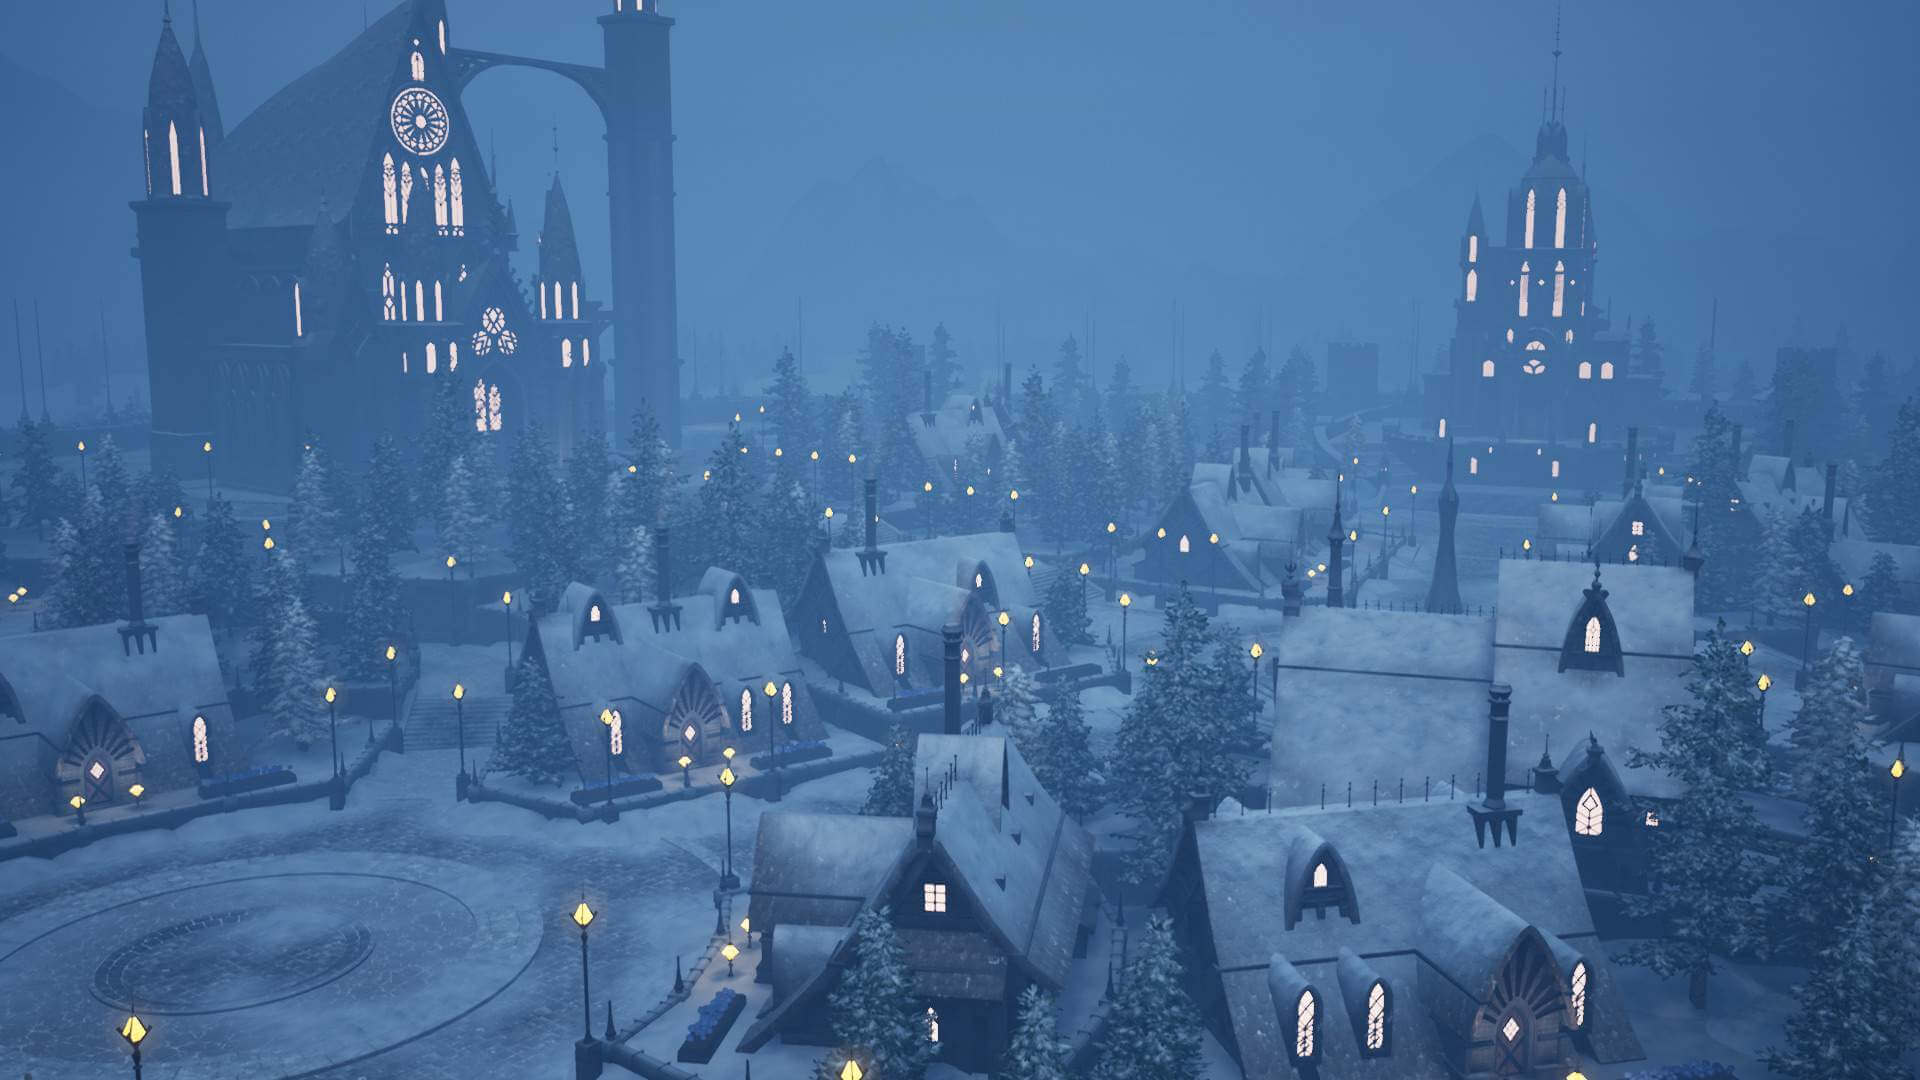 The wintry city of Argene in Harvestella